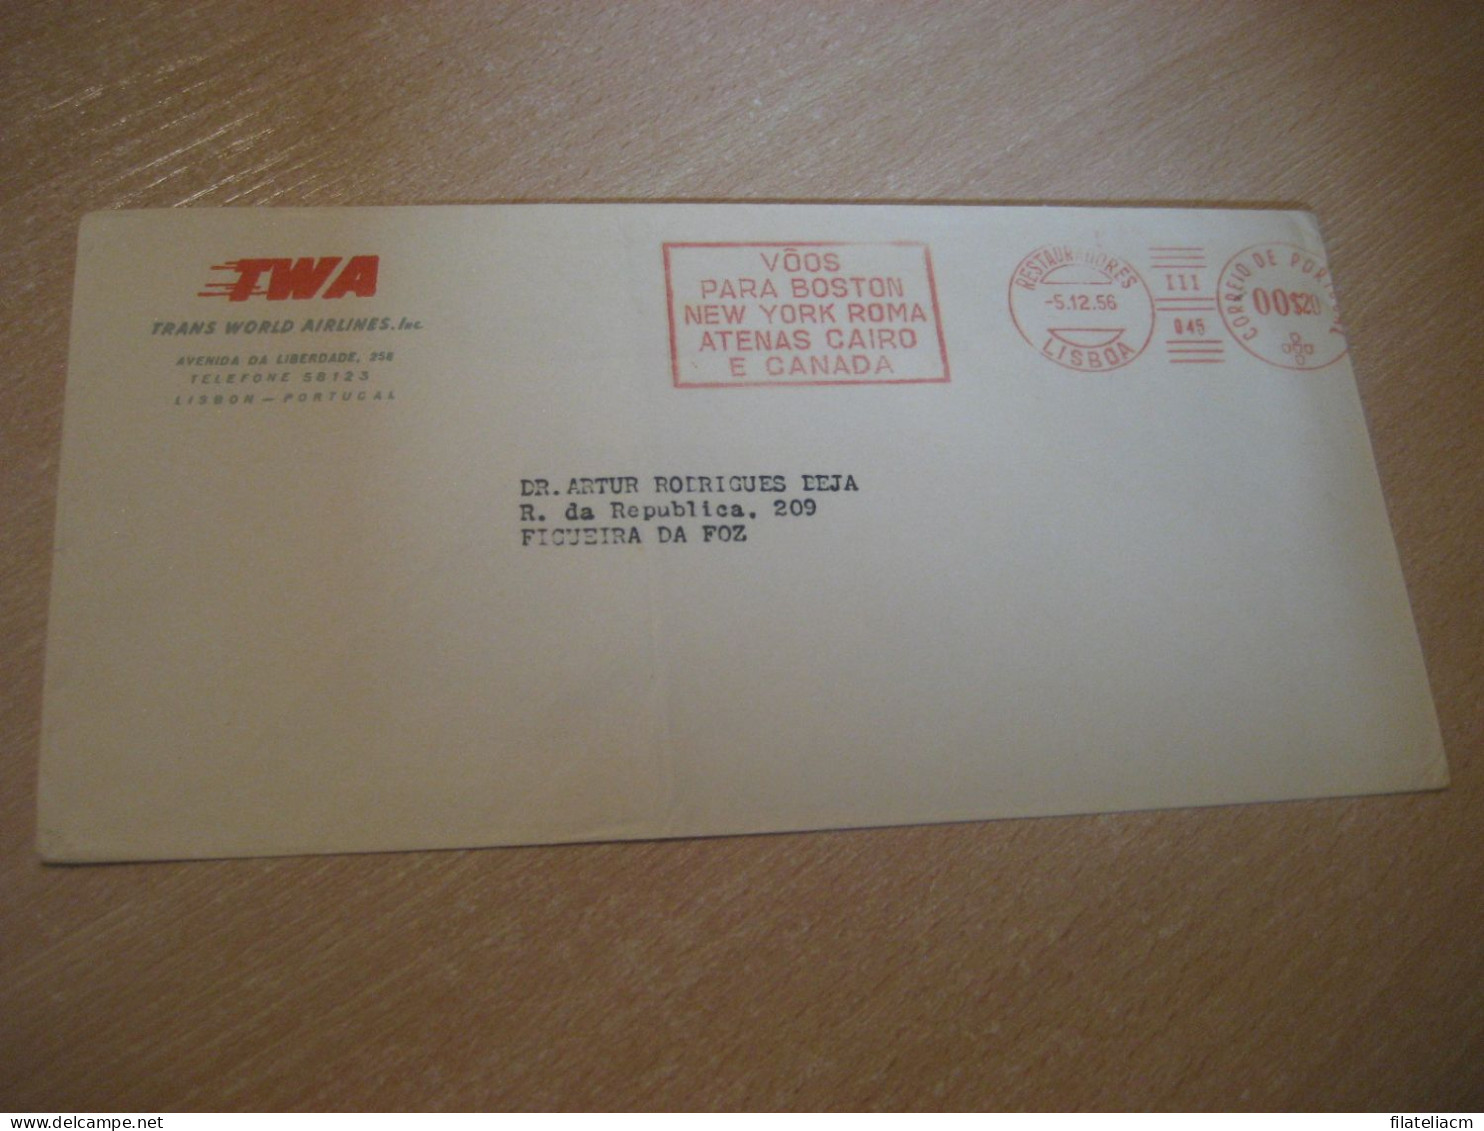 LISBOA 1956 To Figueira Da Foz TWA Airline Trans World Airlines Voos Flight Meter Mail Cancel Cover PORTUGAL - Lettres & Documents